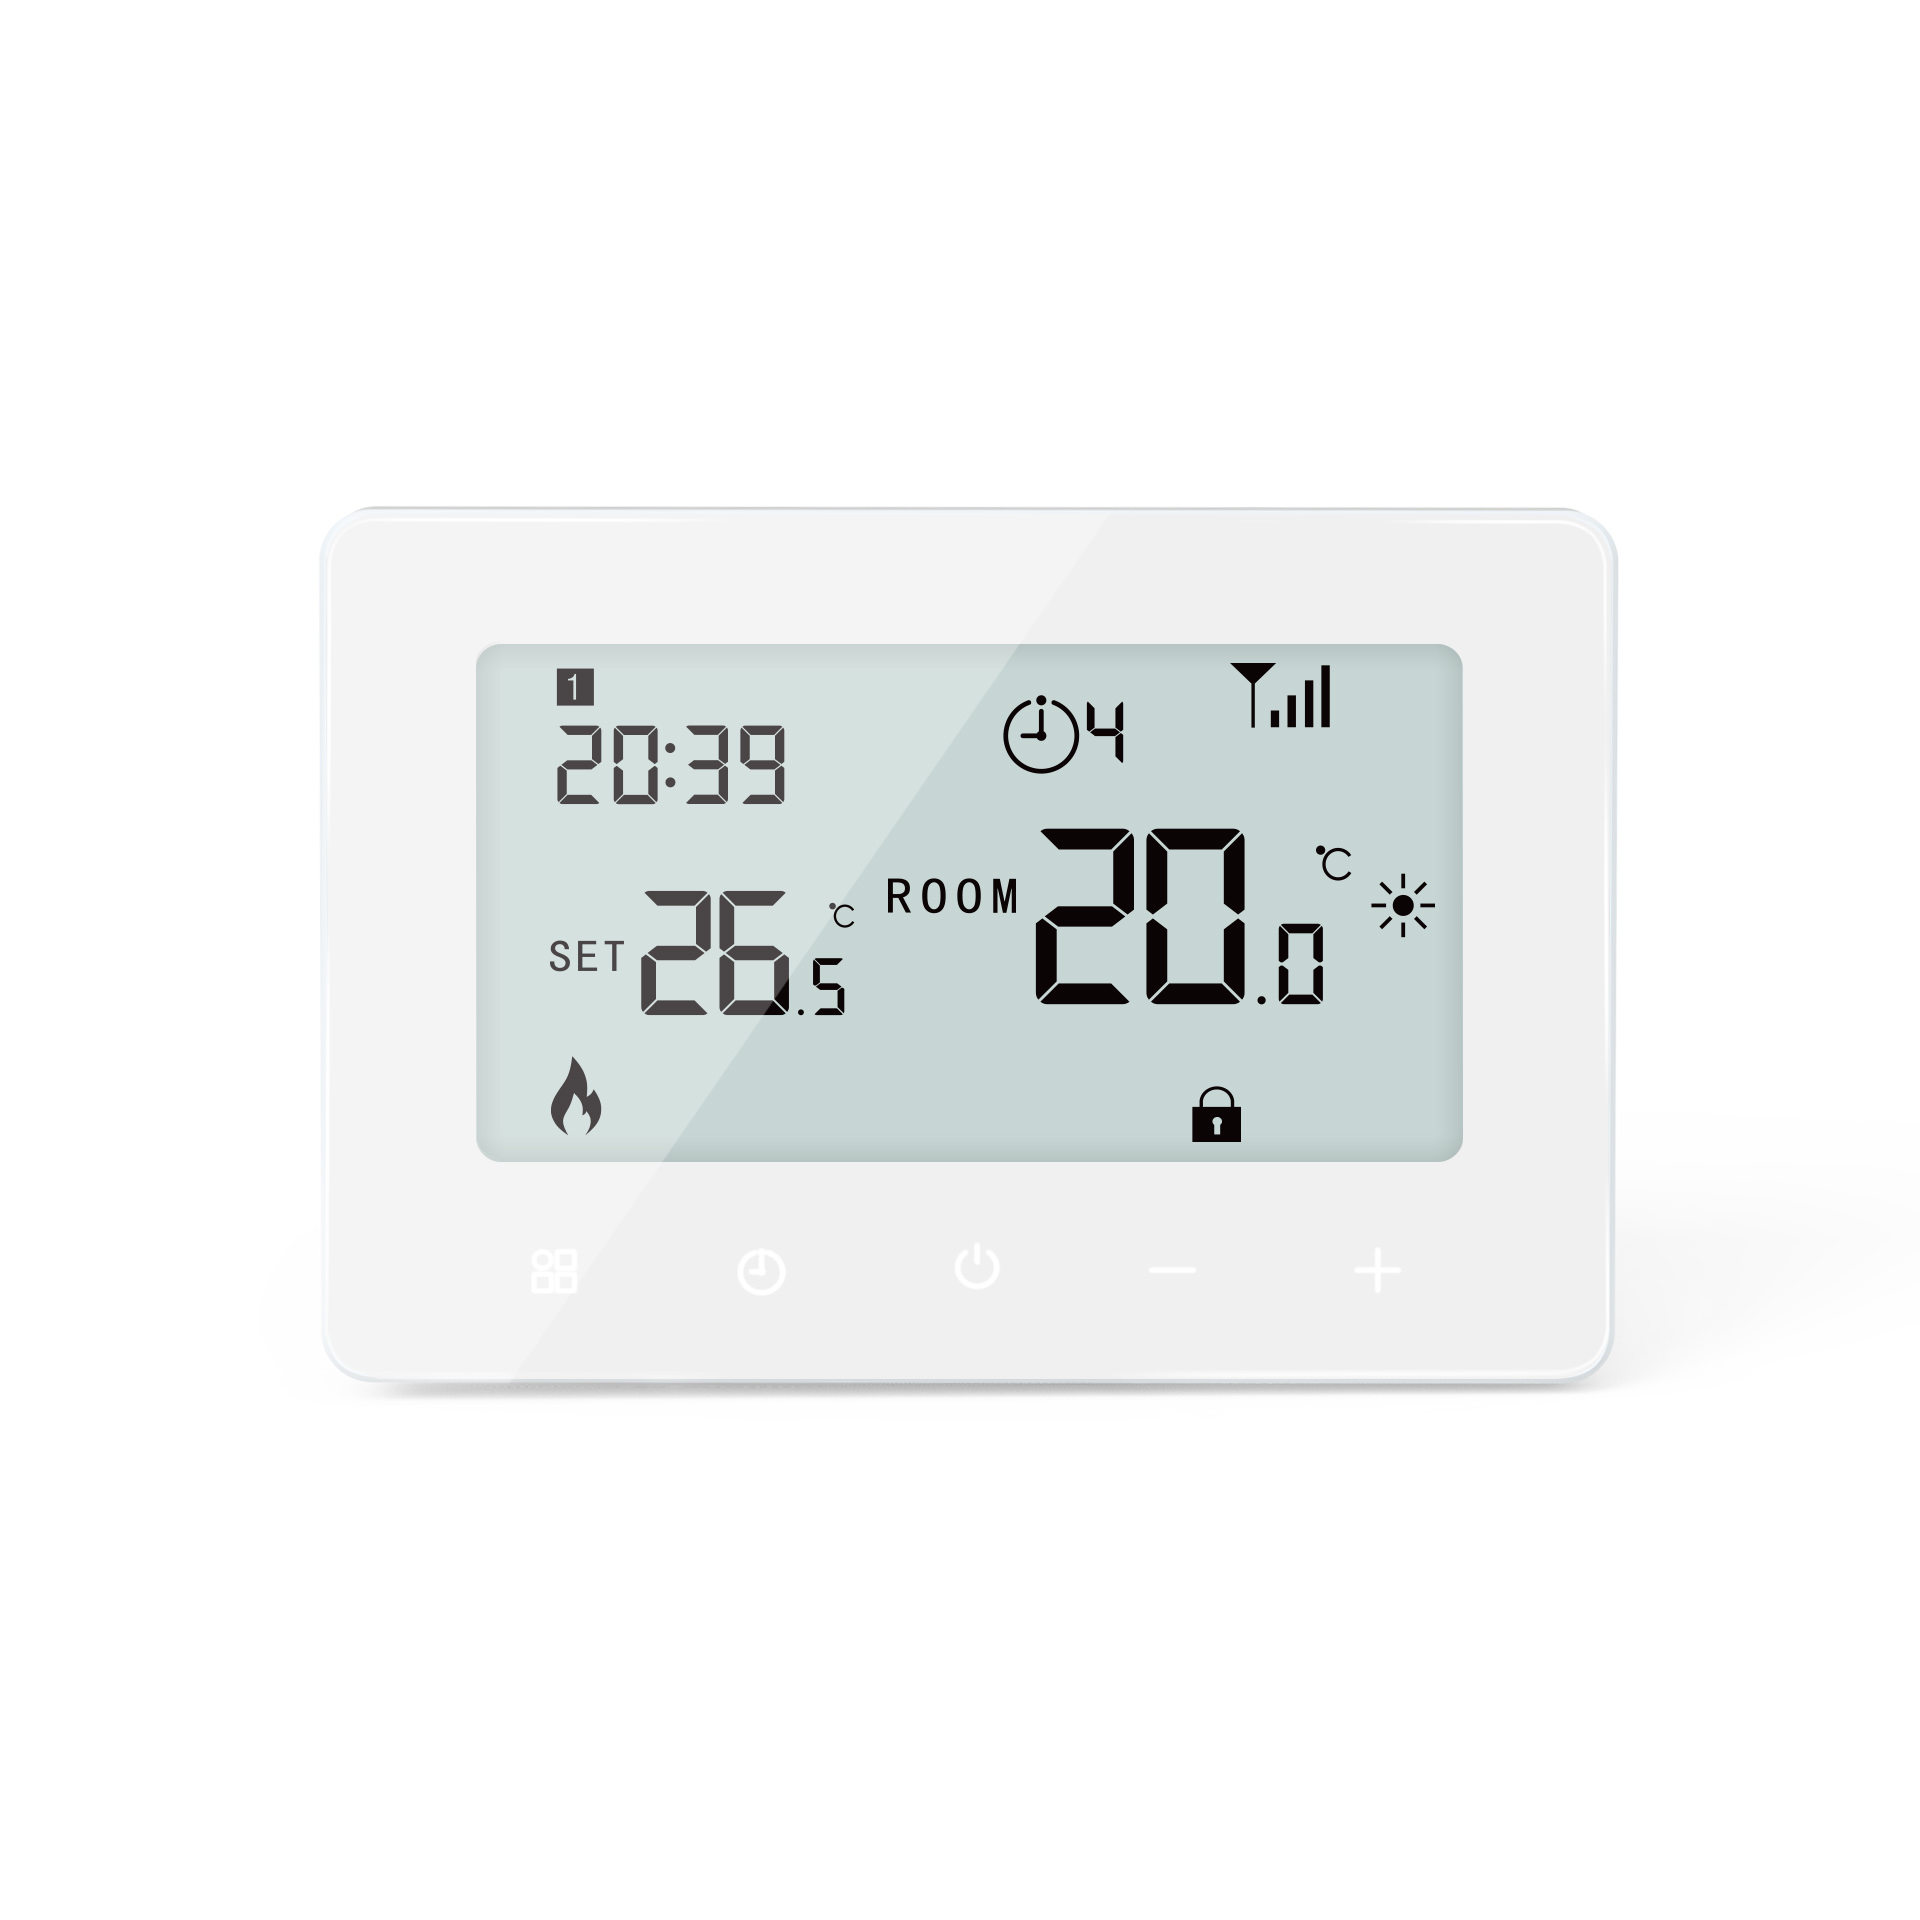 220V Wall mounted Heated floor smart thermostat